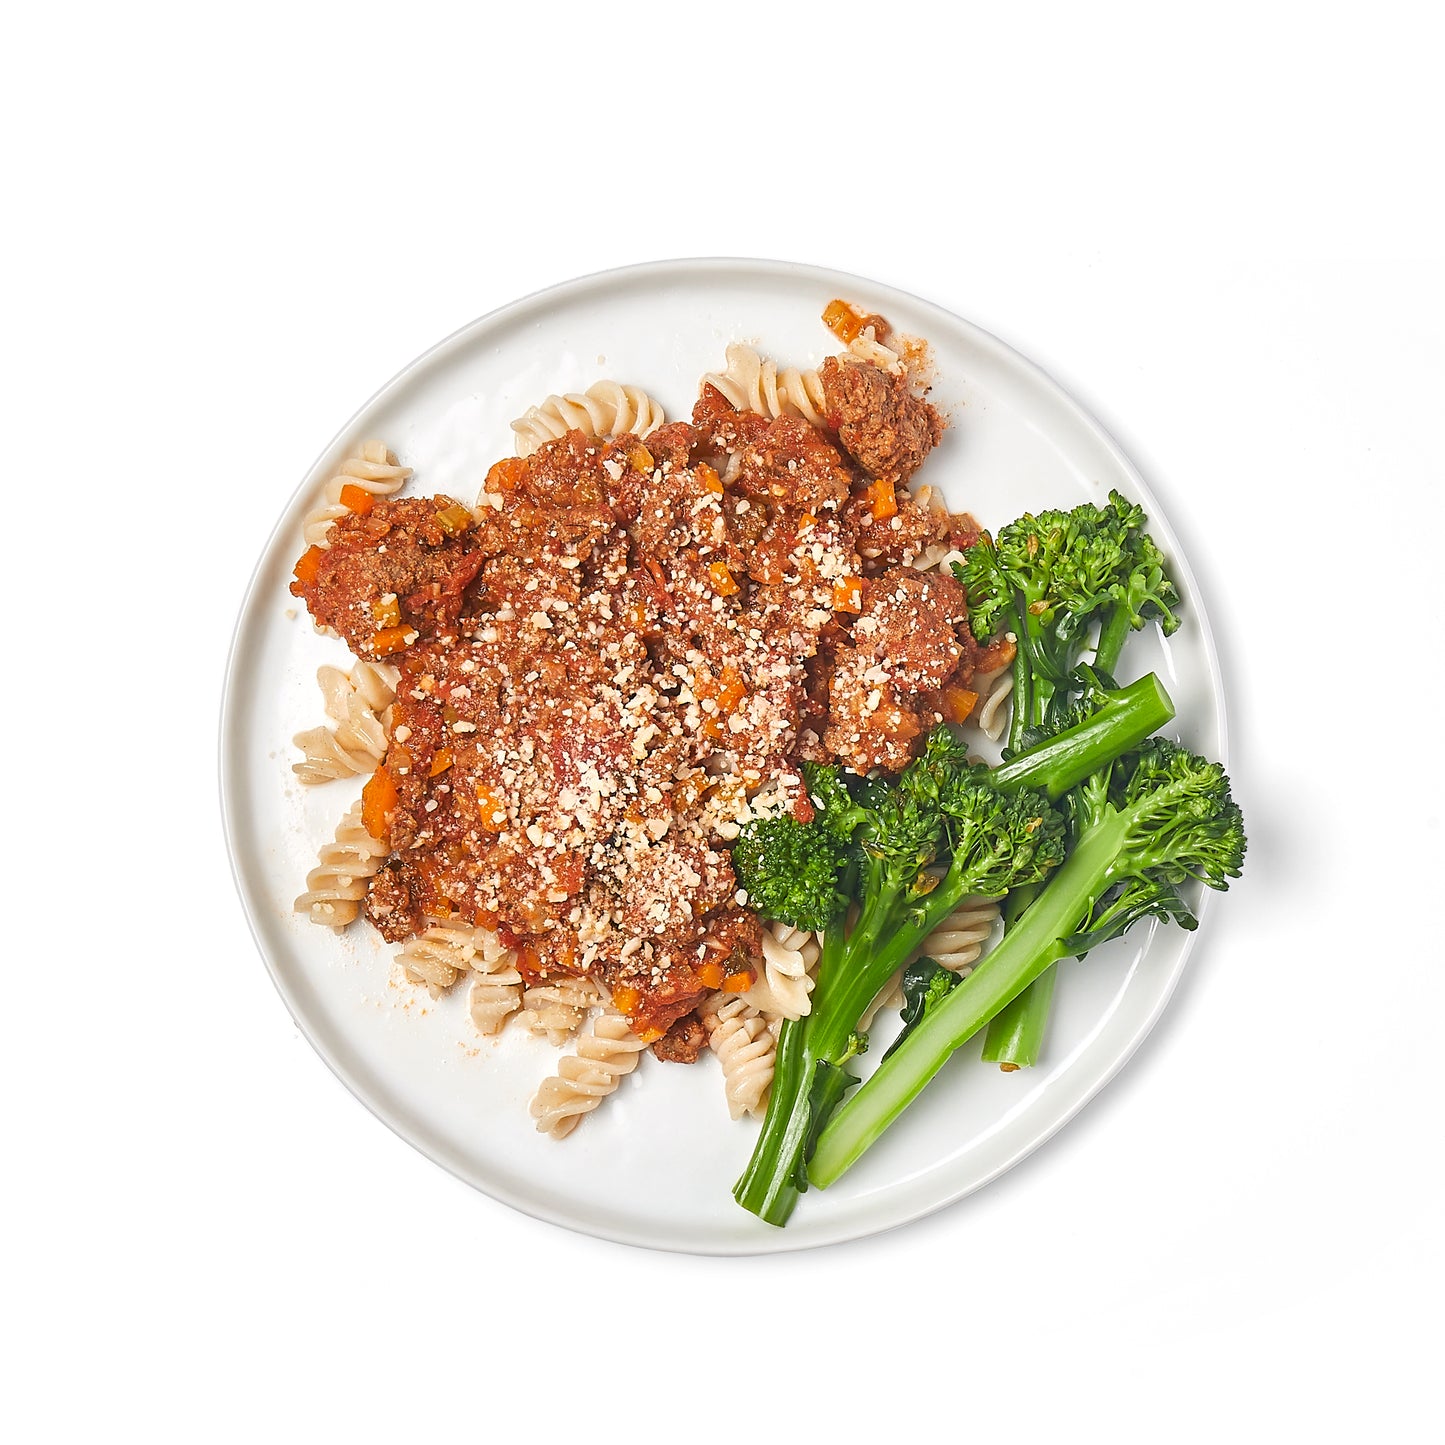 grass-fed beef bolognese azuluna foods Premium Pasture-Raised ready-to-eat Meals Delivery